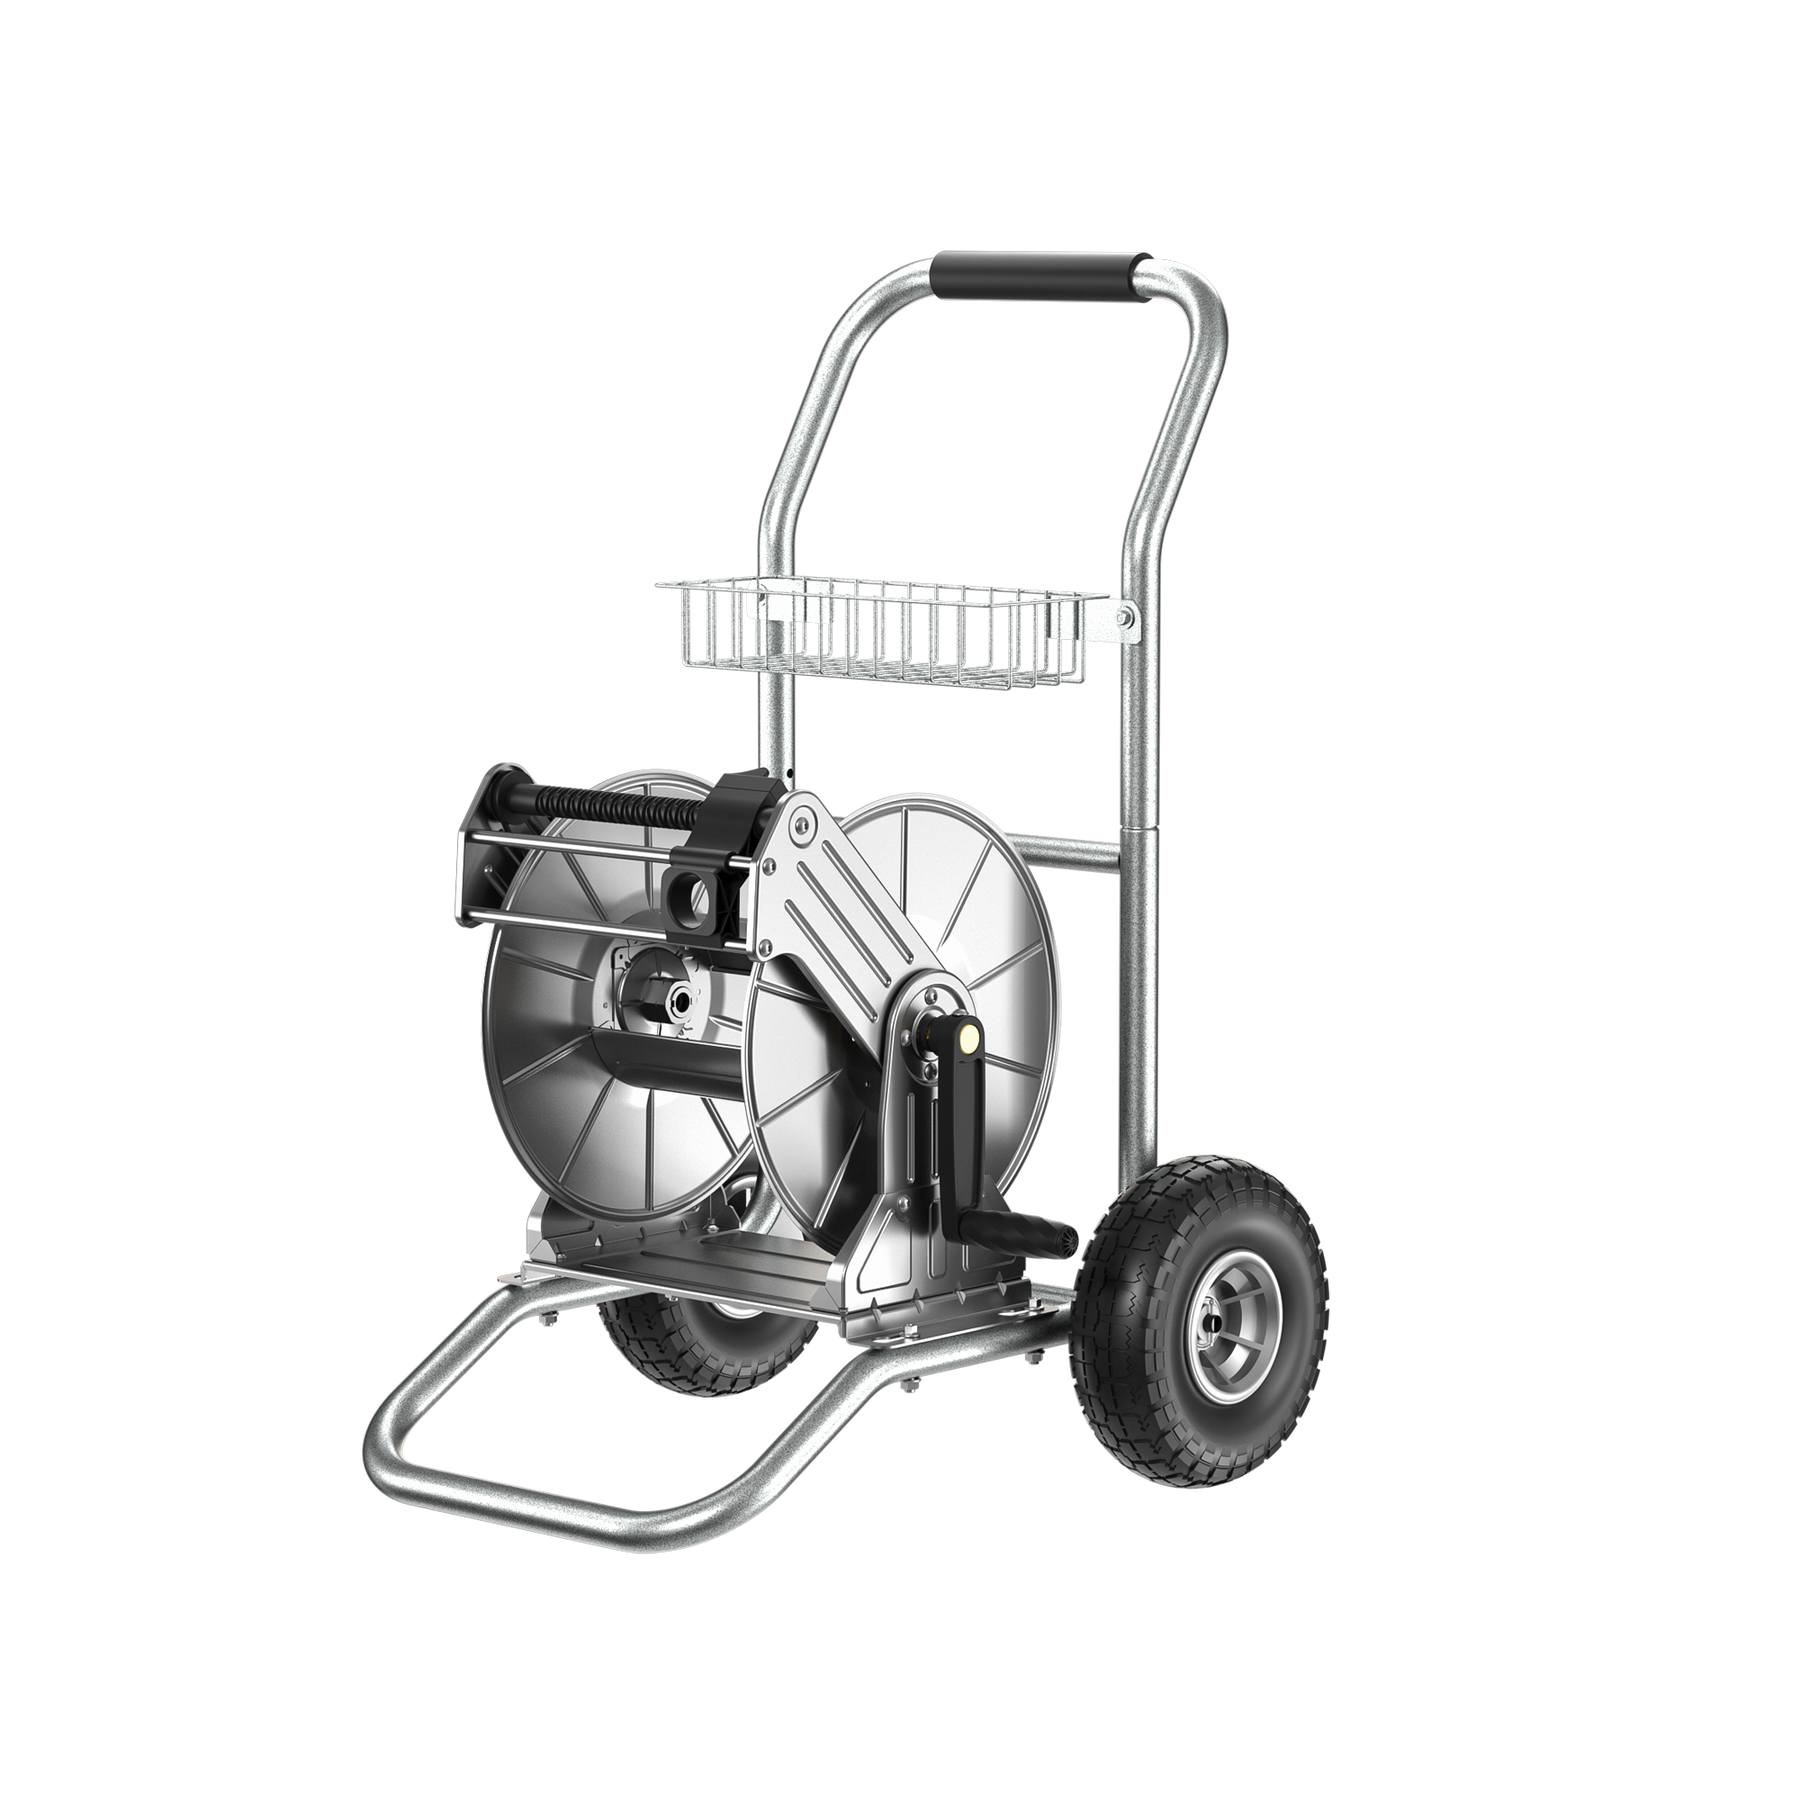 Dolphy Garden Pressure Water Hose Reel Cart with Wheels